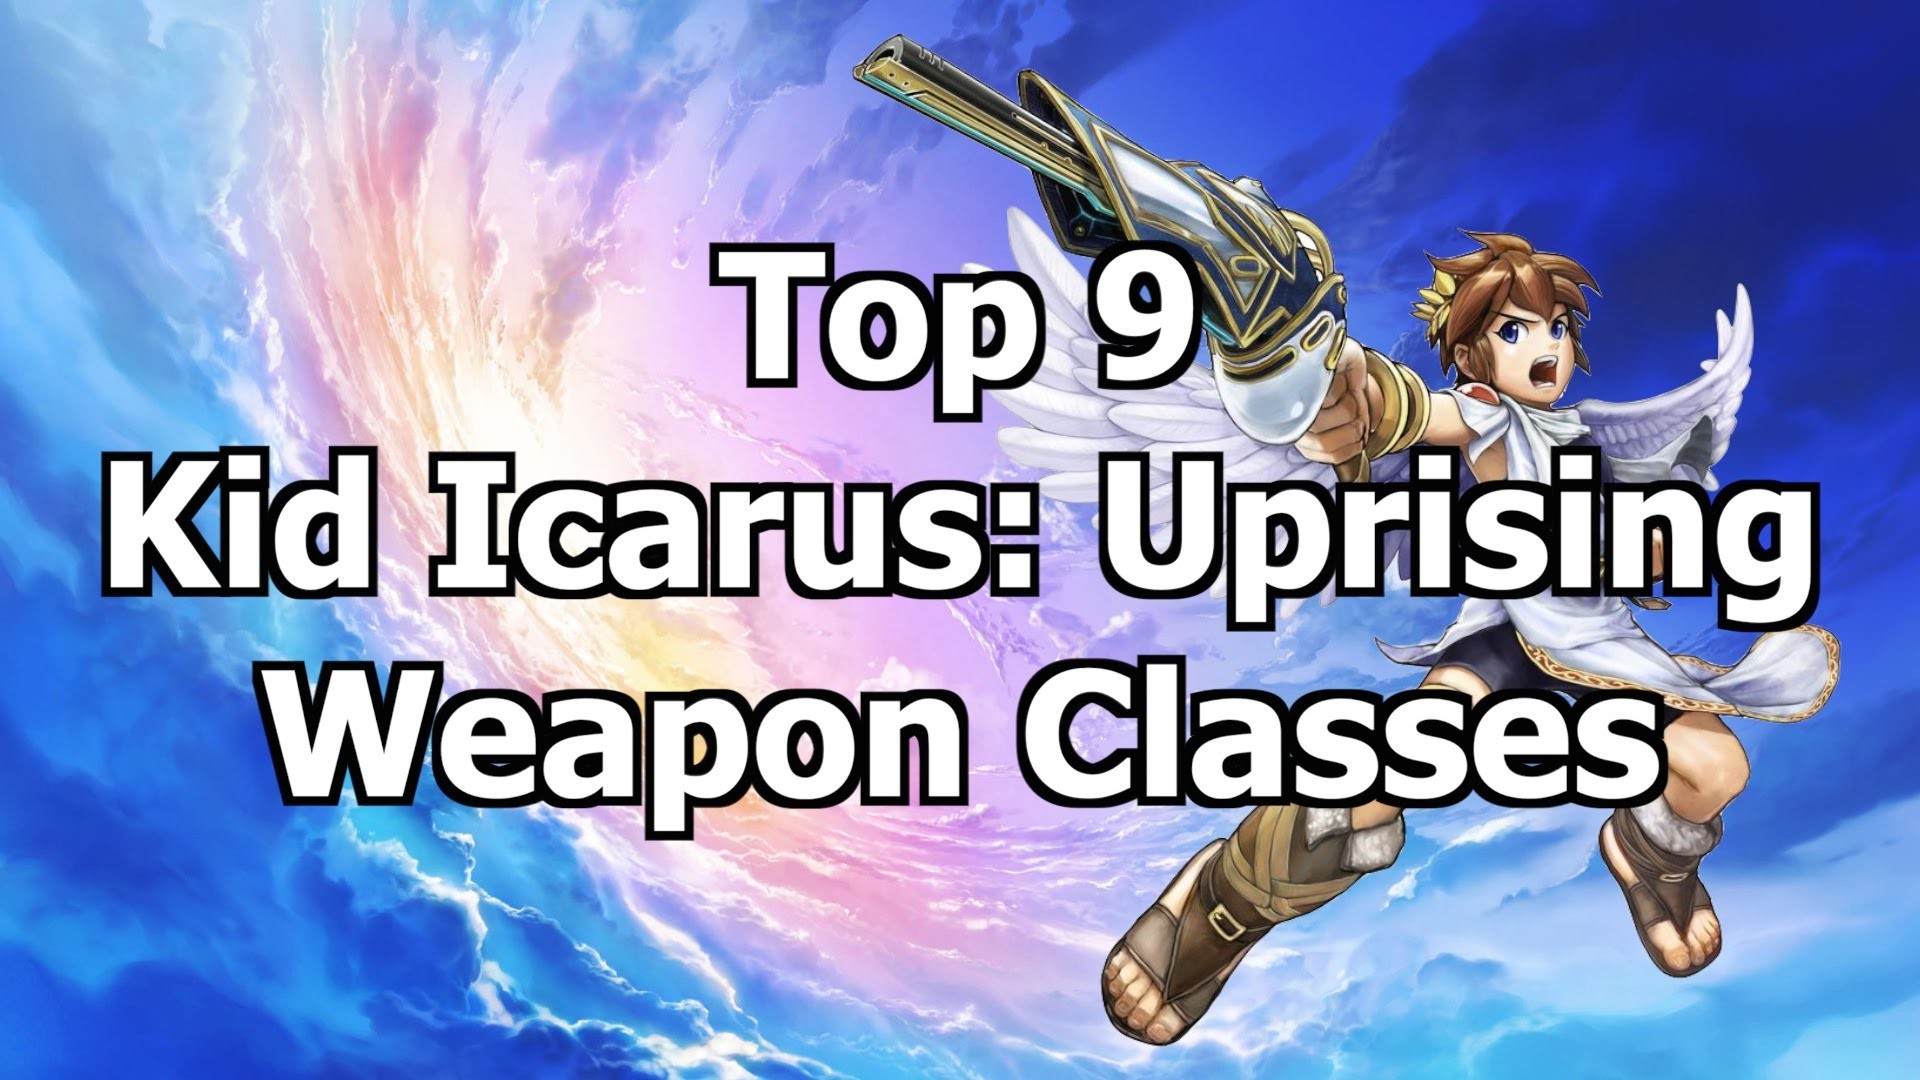 1920x1080 Top 9 Kid Icarus: Uprising Weapon Classes